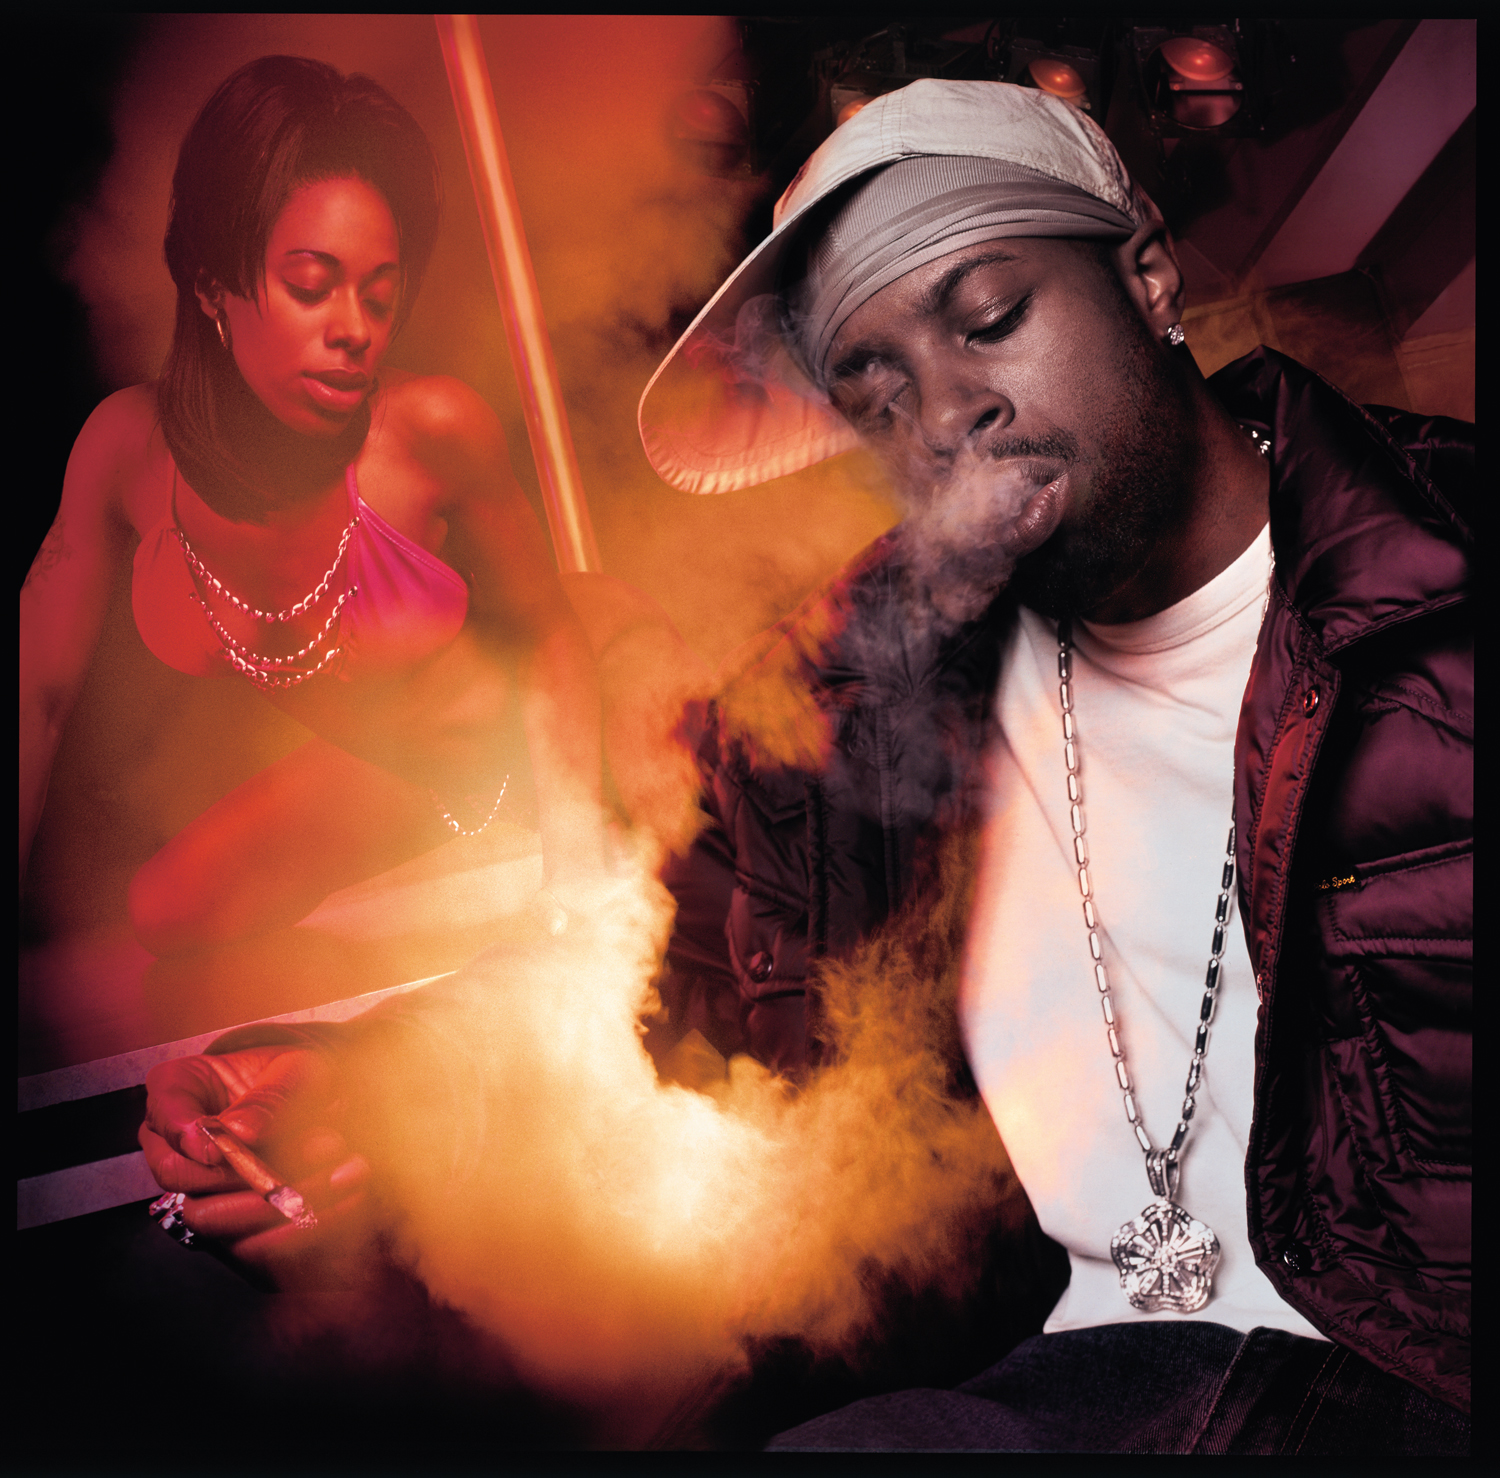 Art for Give It Up (Instrumental) by J Dilla